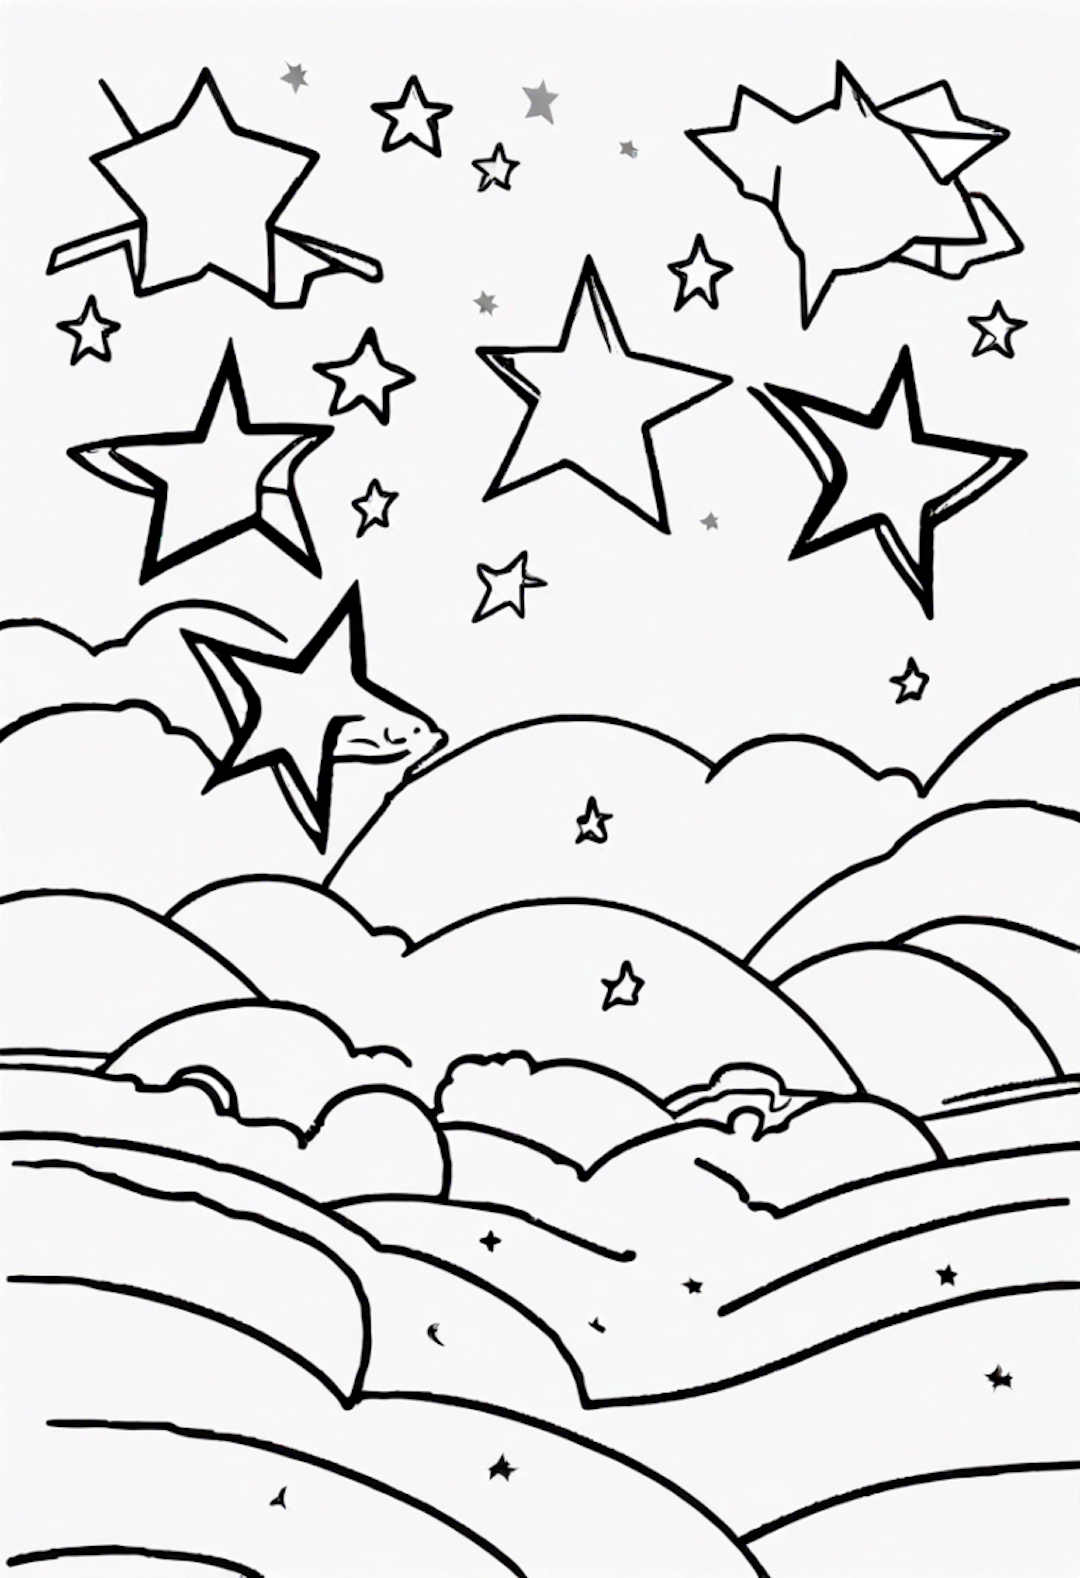 Starlight Dreams with Sparky the Star coloring pages